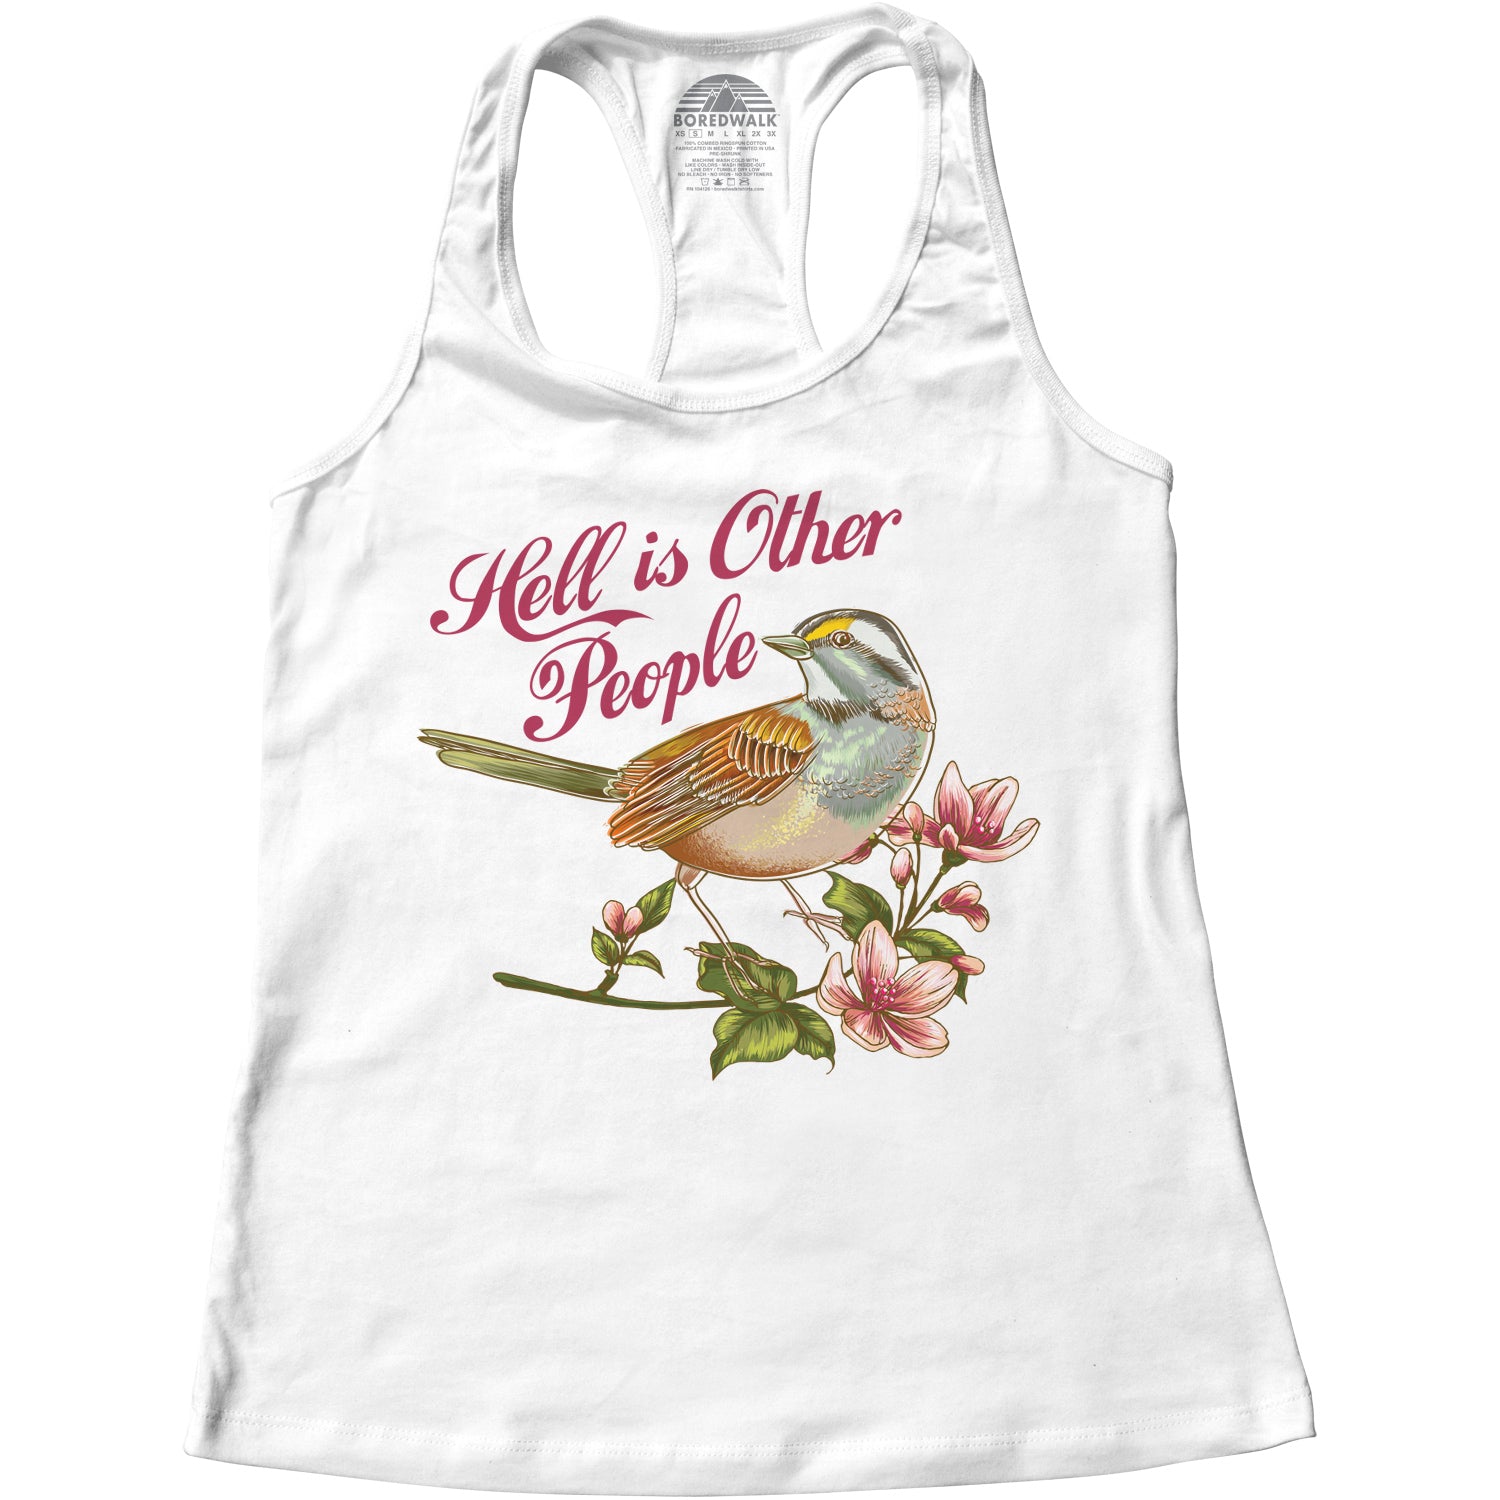 Women's Hell Is Other People Racerback Tank Top